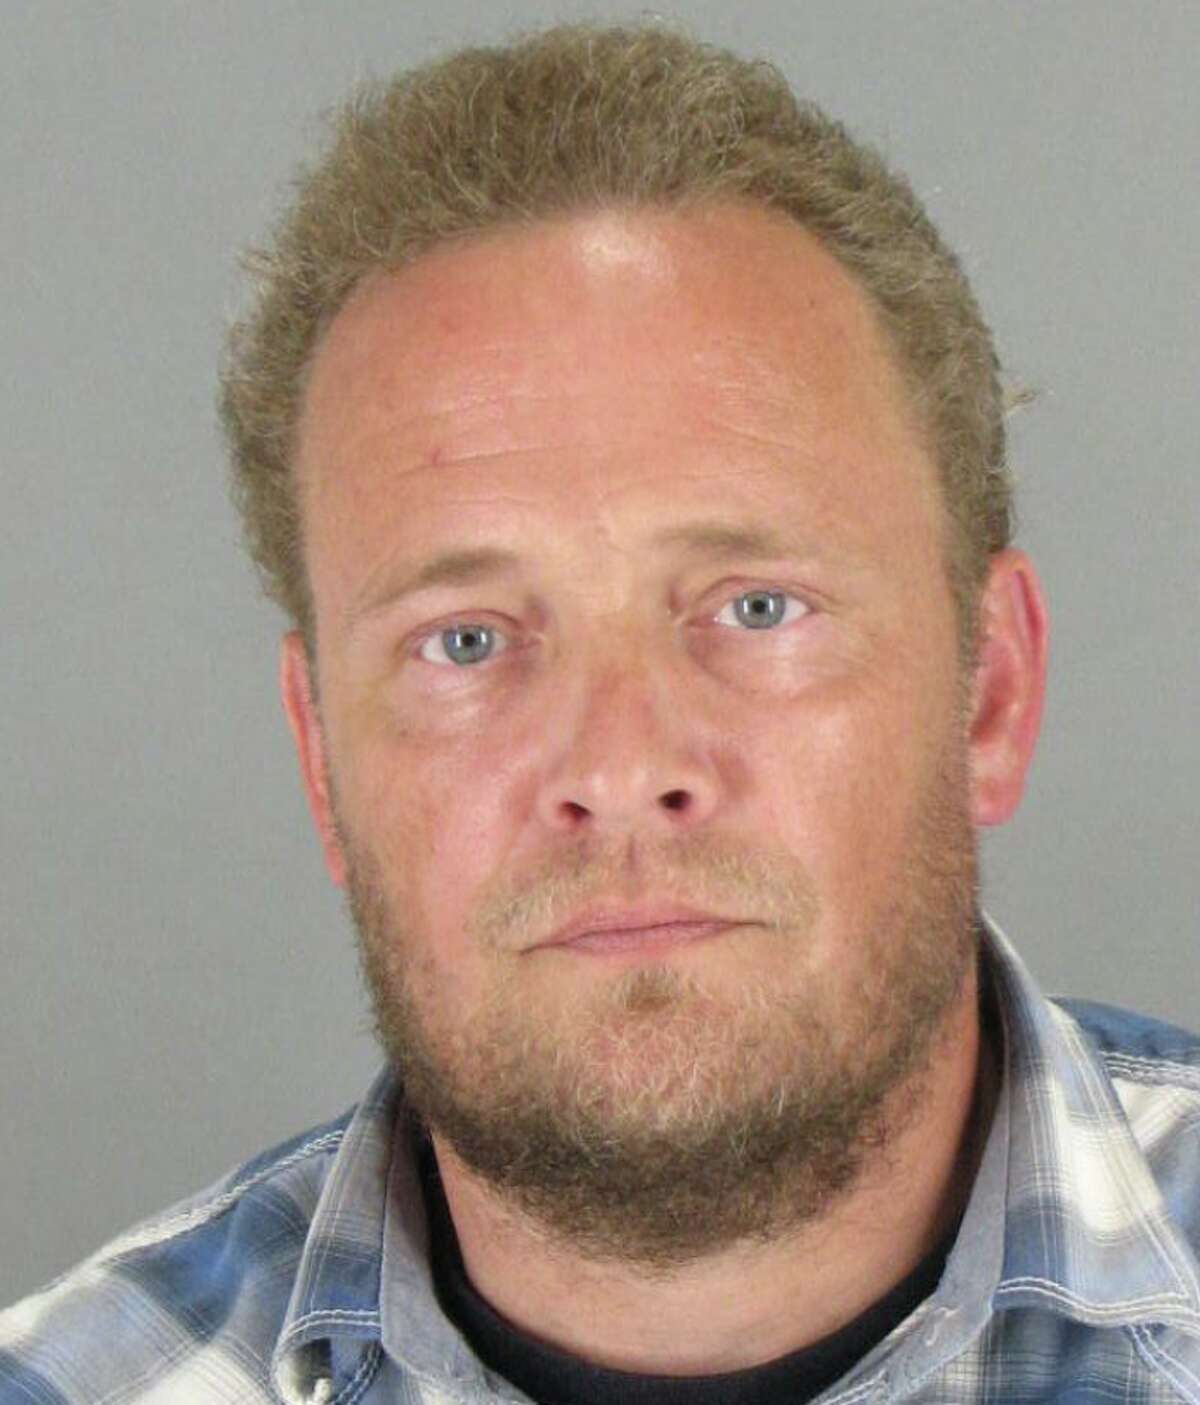 A San Francisco police officer charged this week with robbing a bank is also facing criminal charges of elder abuse in San Mateo County, where prosecutors said he systematically stole more than $13,000 over a three-month period from a 76-year-old man with dementia.